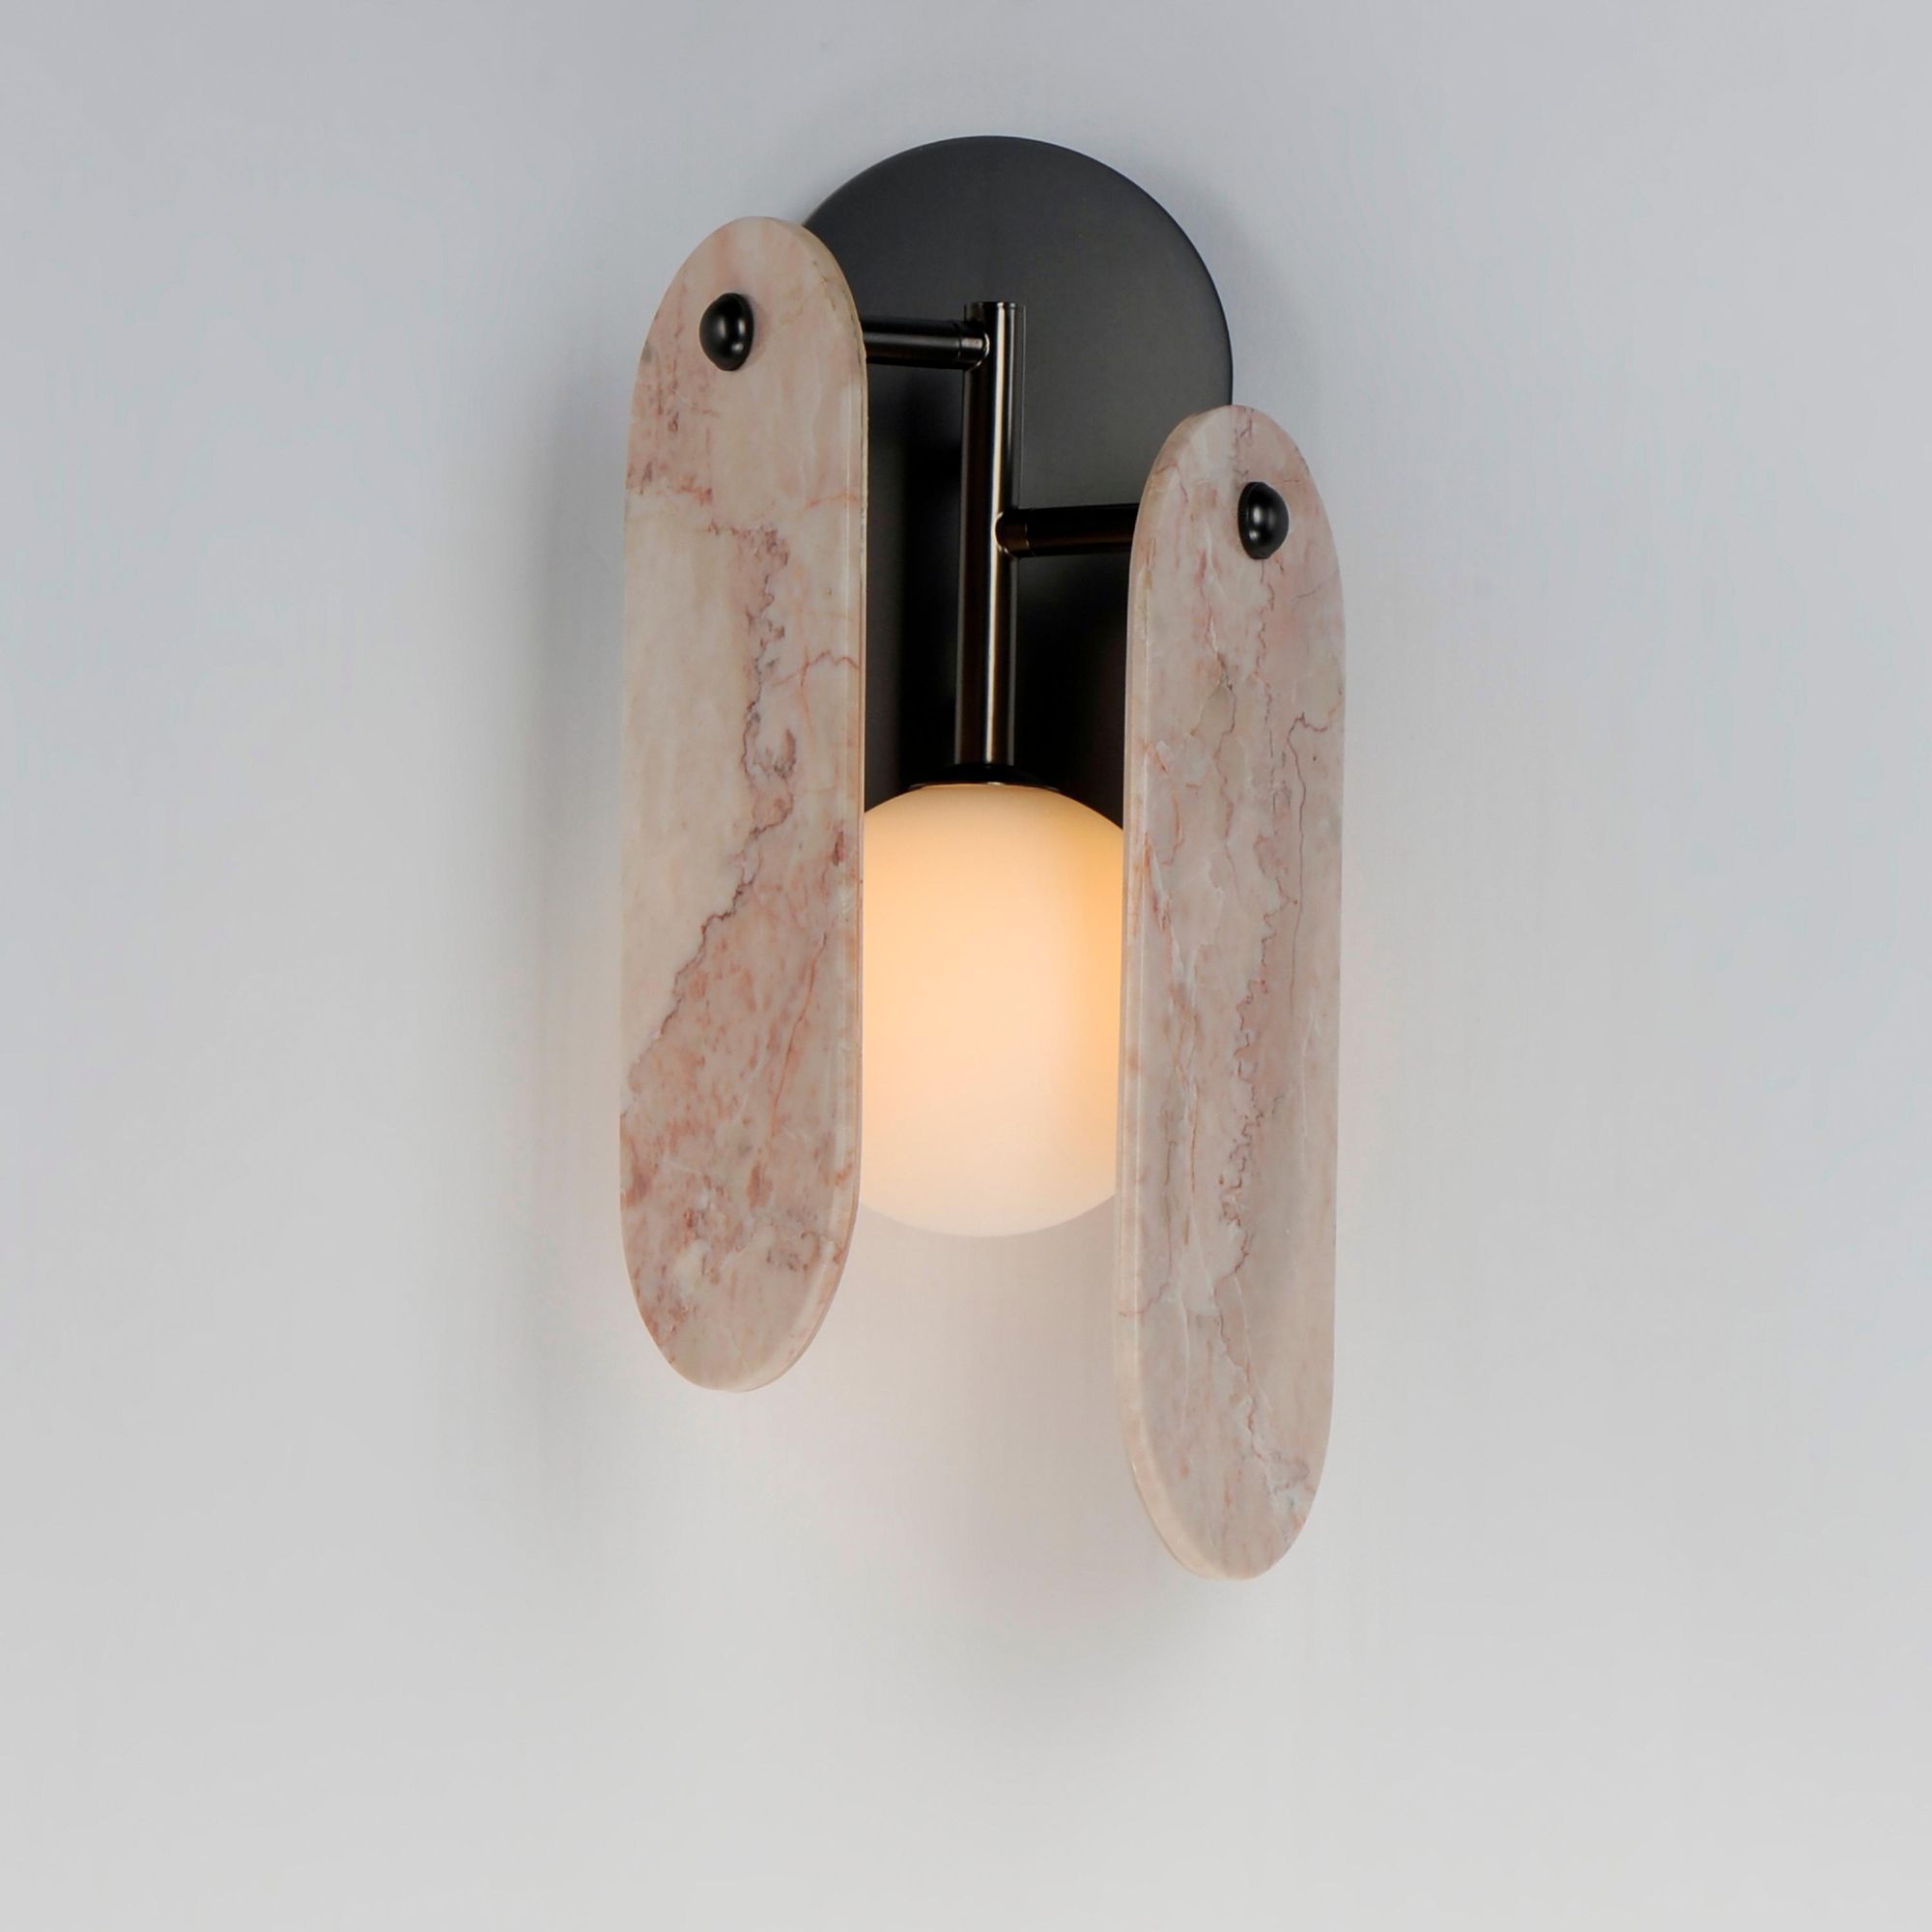 Studio M SM24810RJGM Megalith Rose Jade Wall Sconce in Gunmetal by Nina Magon